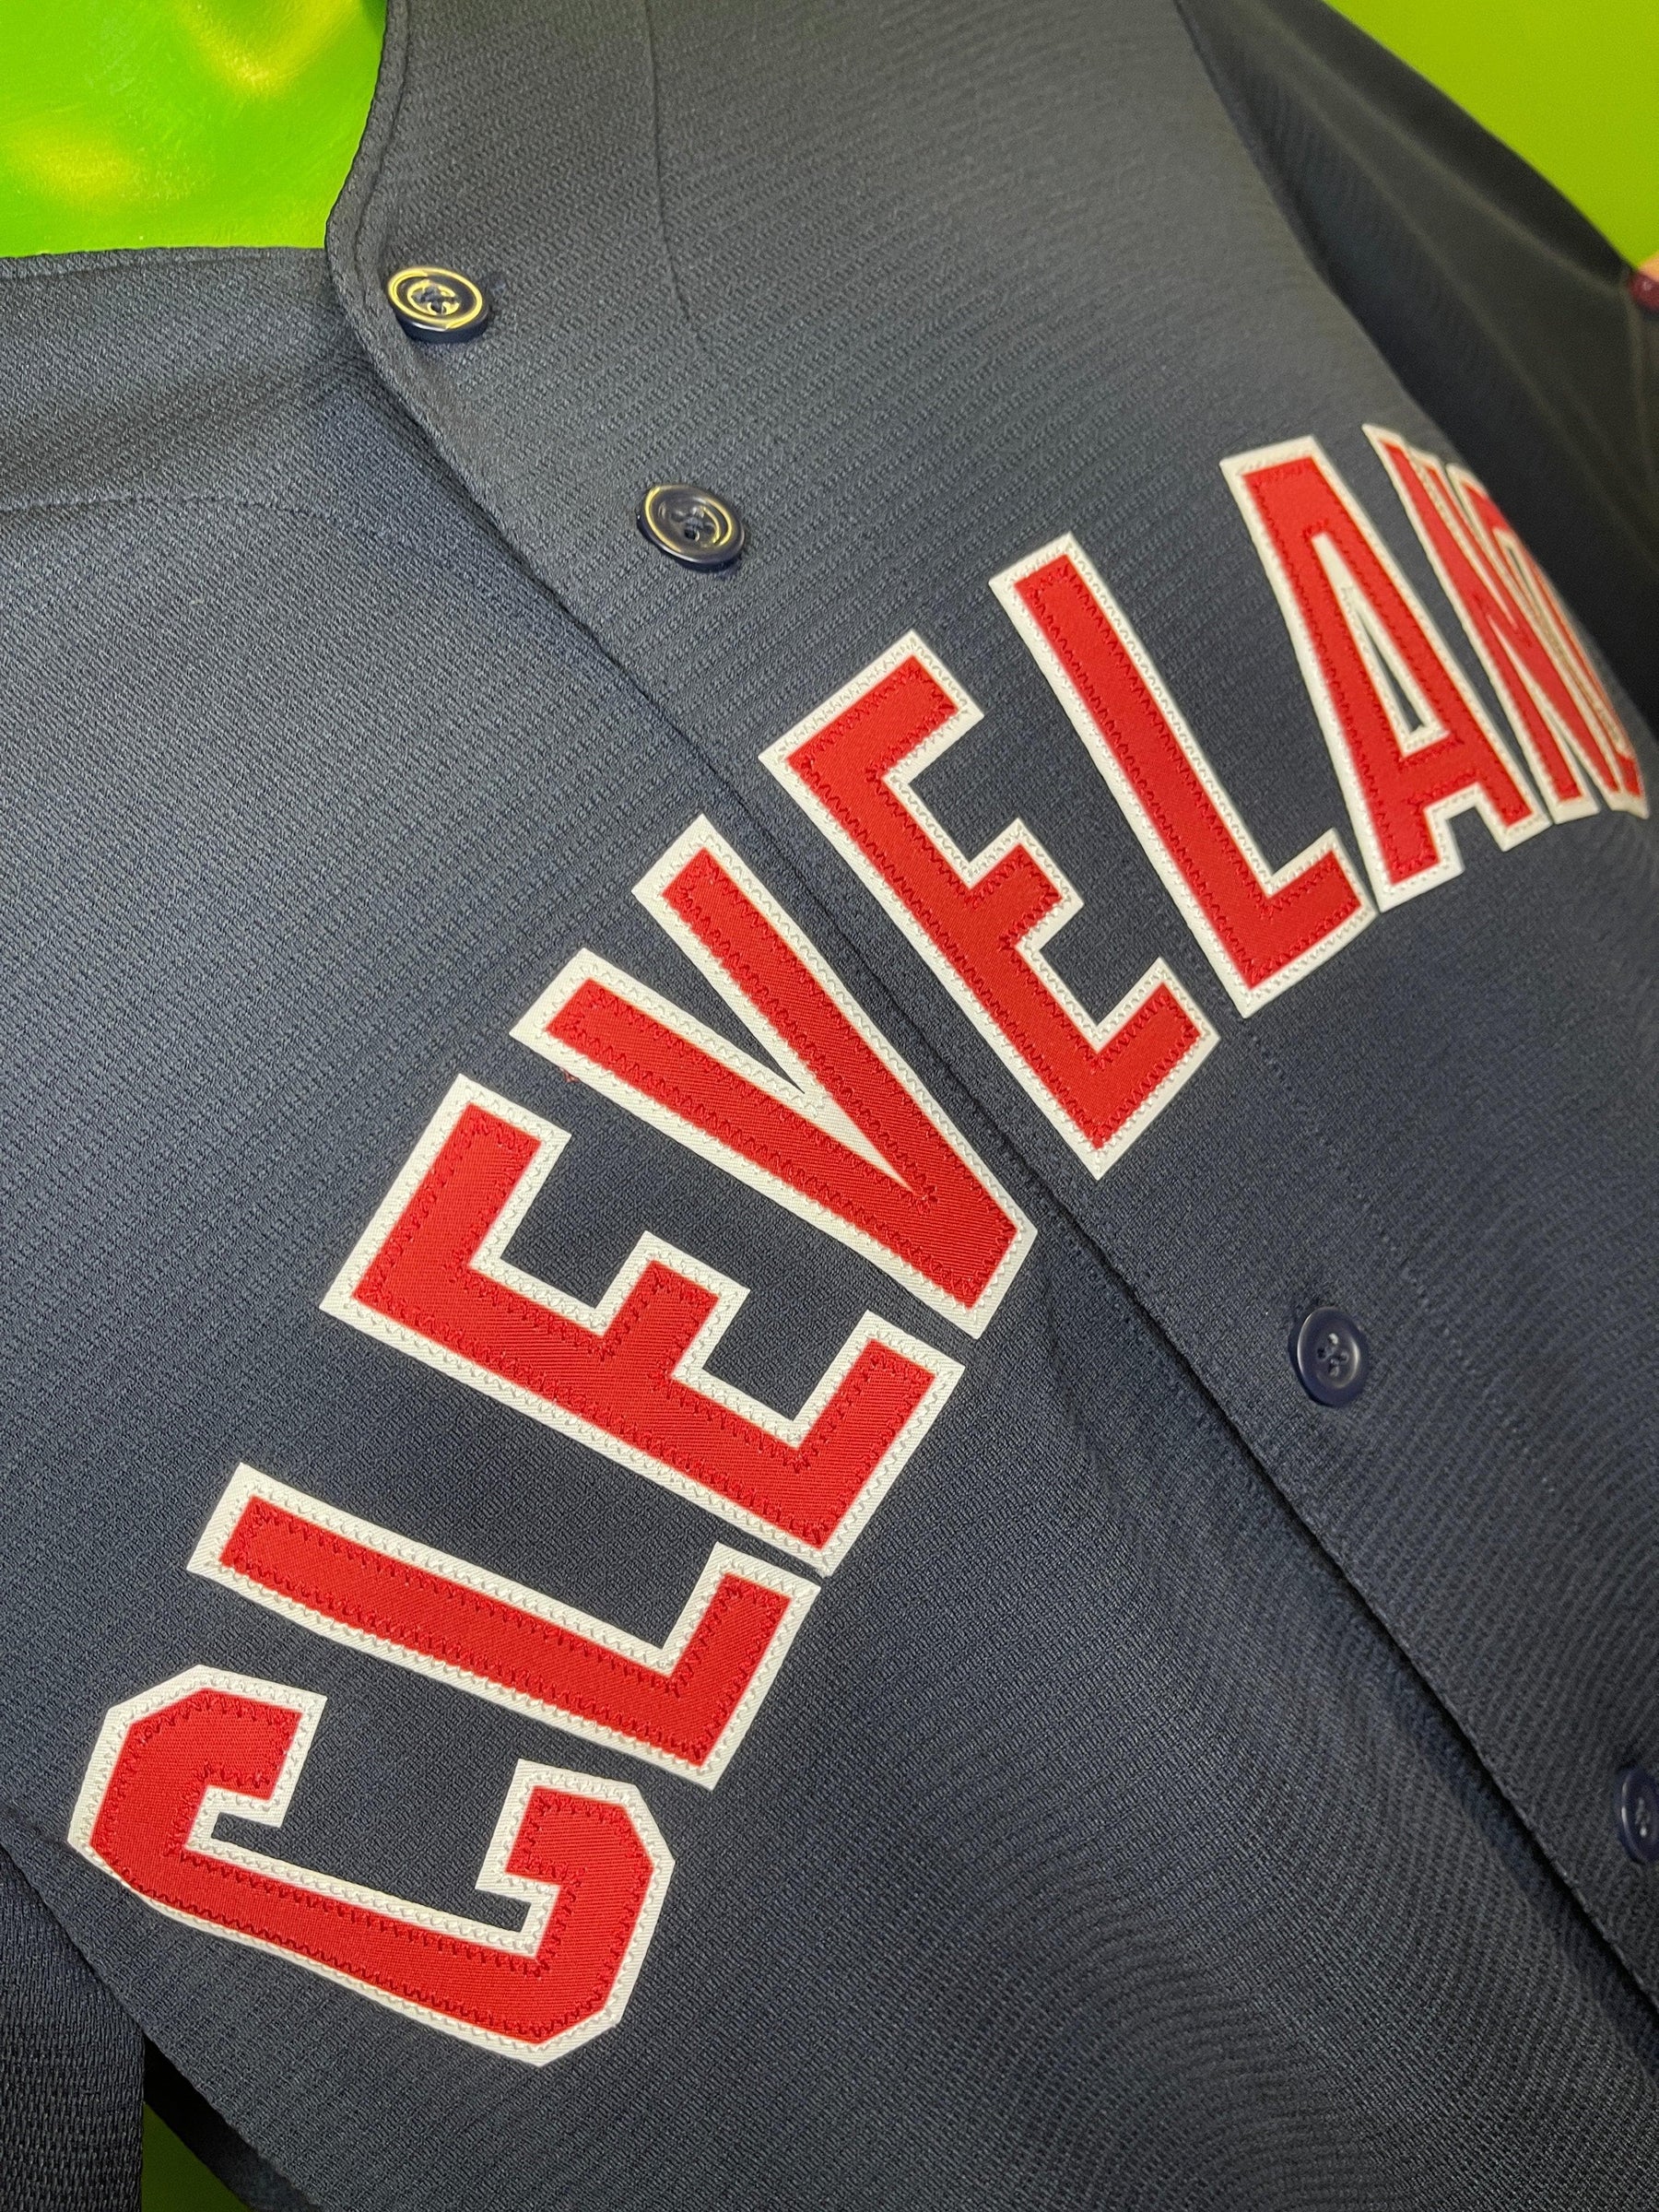 MLB Cleveland Guardians Jersey Blue Men's Small NWT